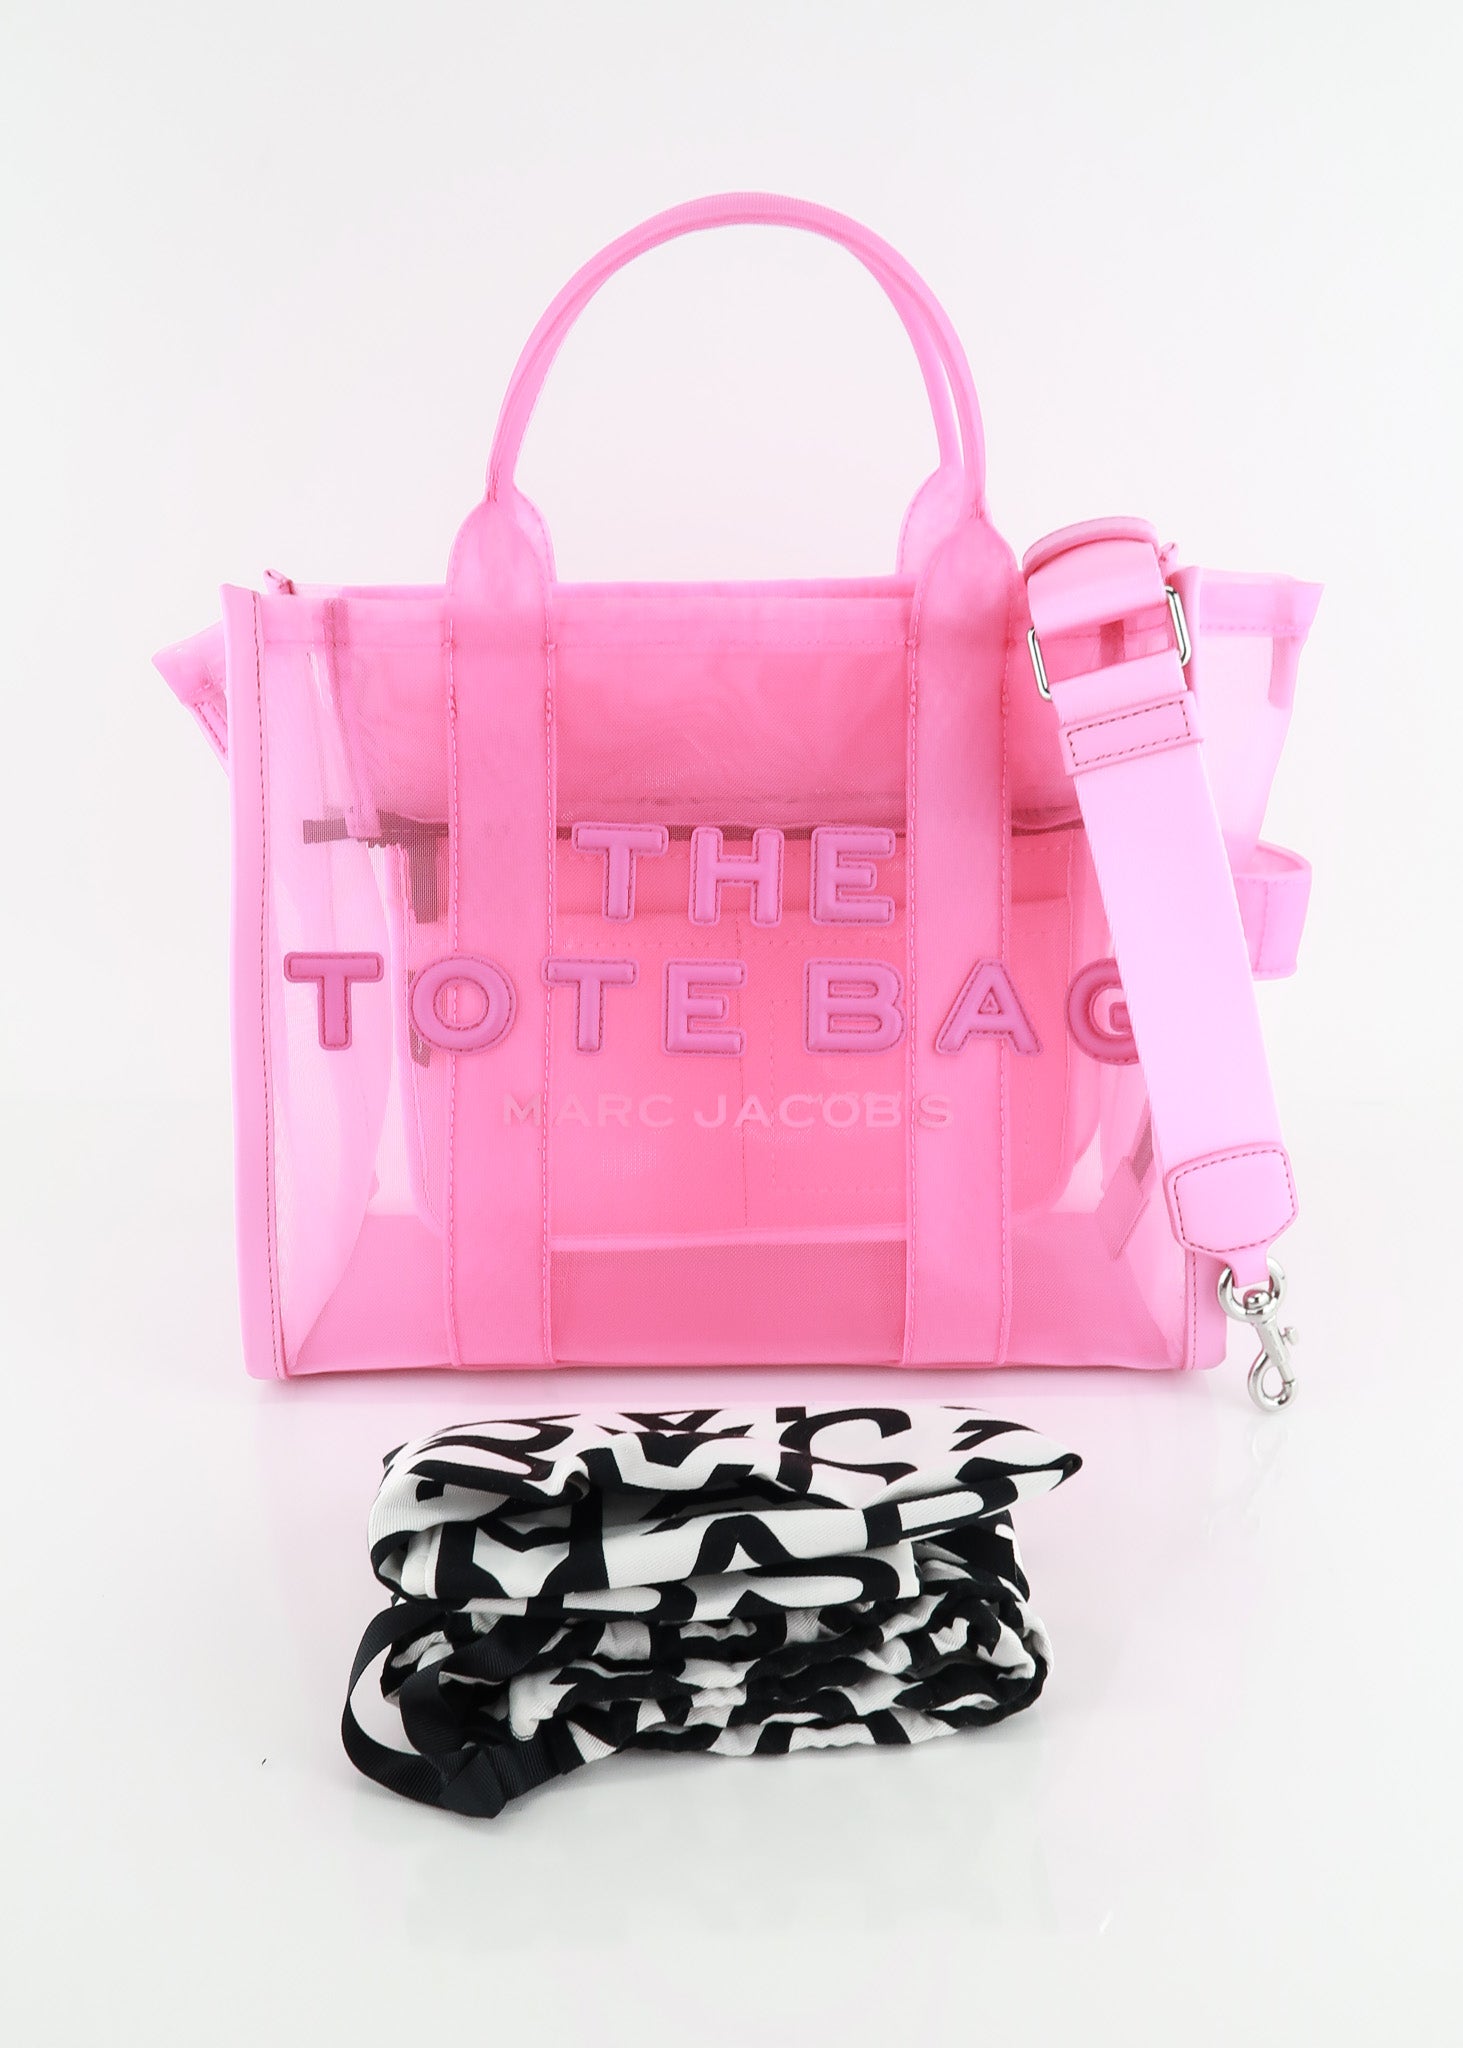 The Medium Mesh Tote Bag in Pink - Marc Jacobs